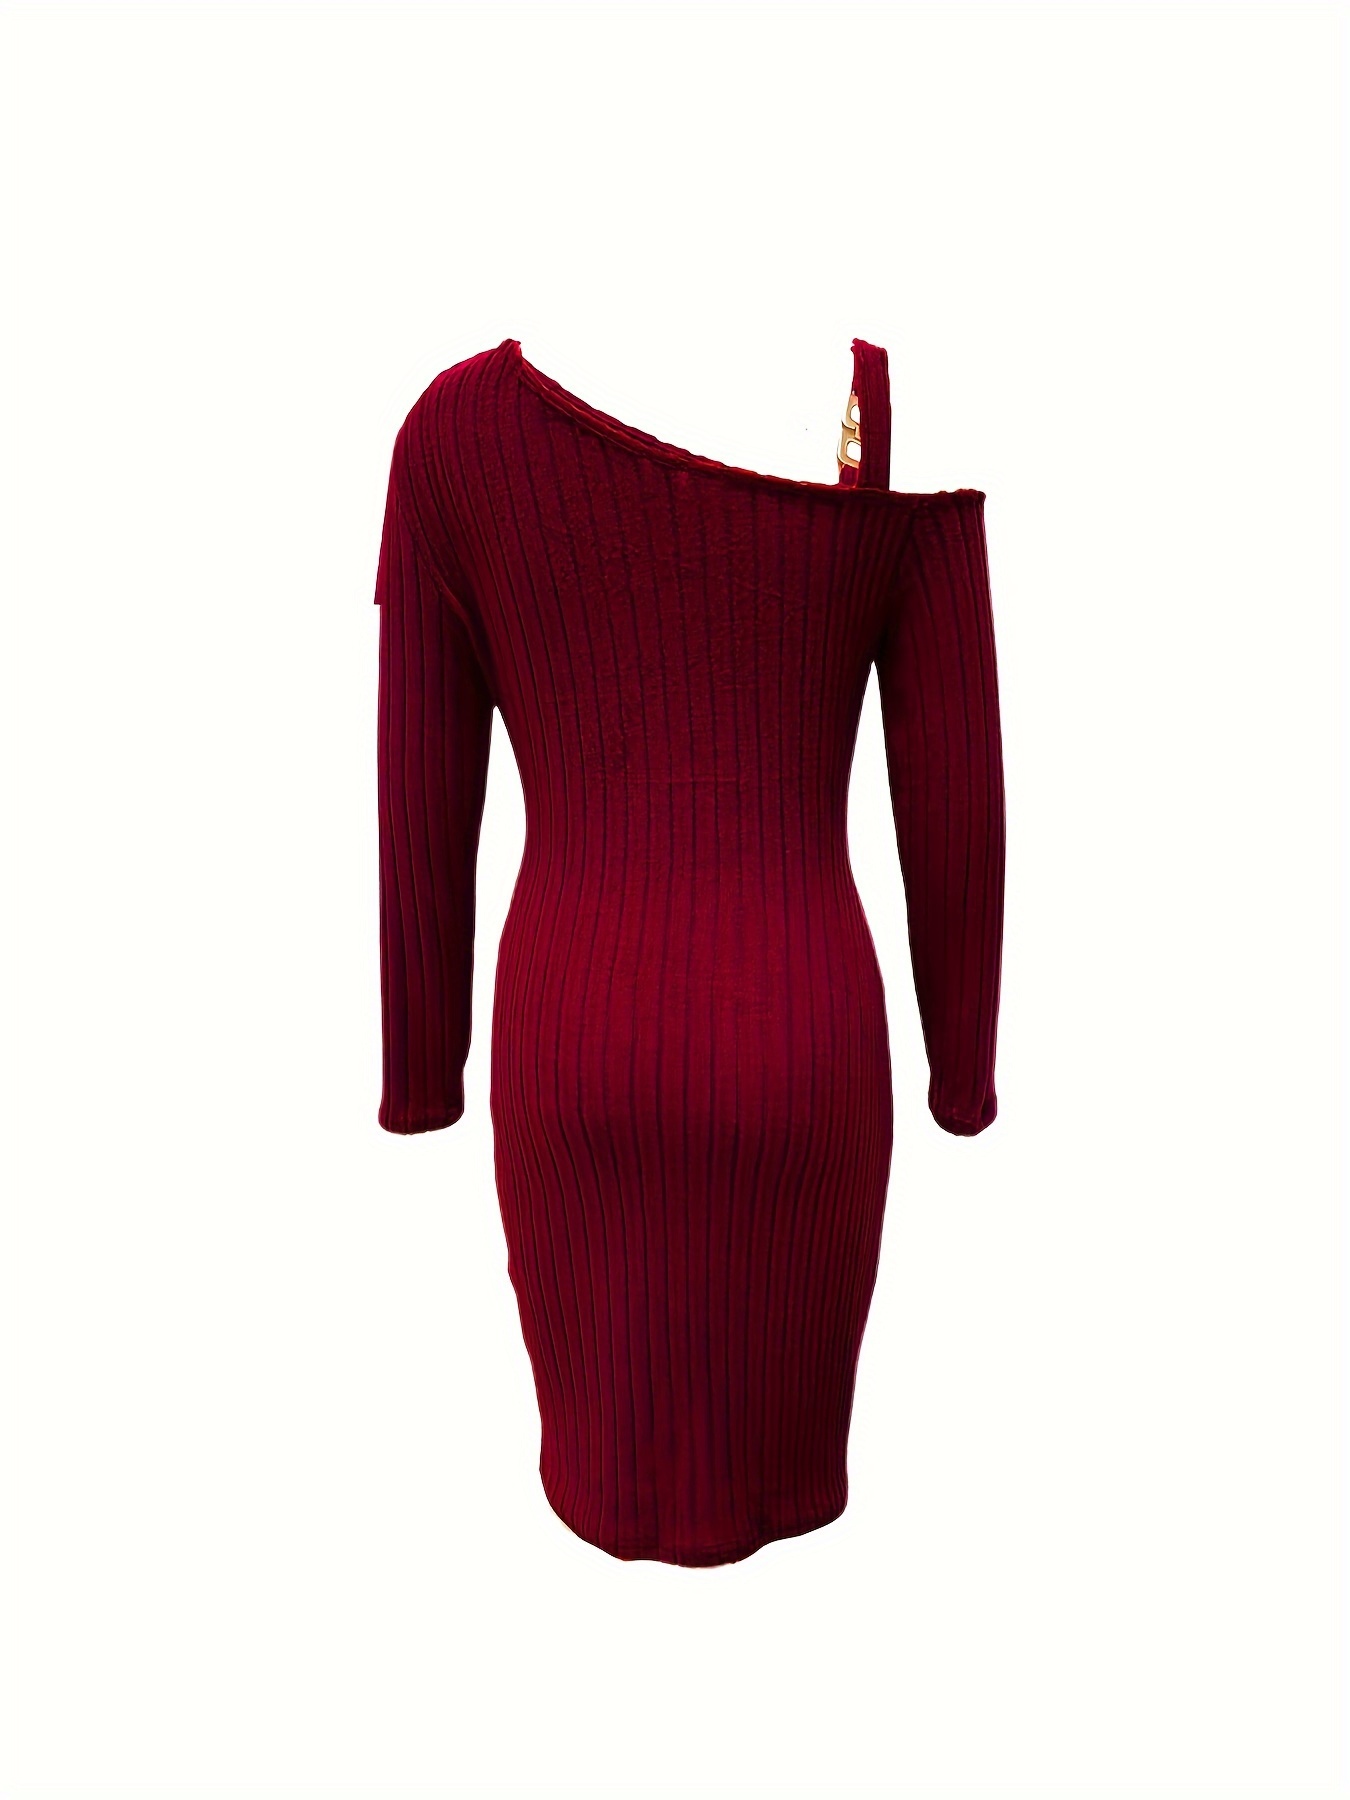 ribbed slanted shoulder dress party wear solid long sleeve mini dress womens clothing details 15